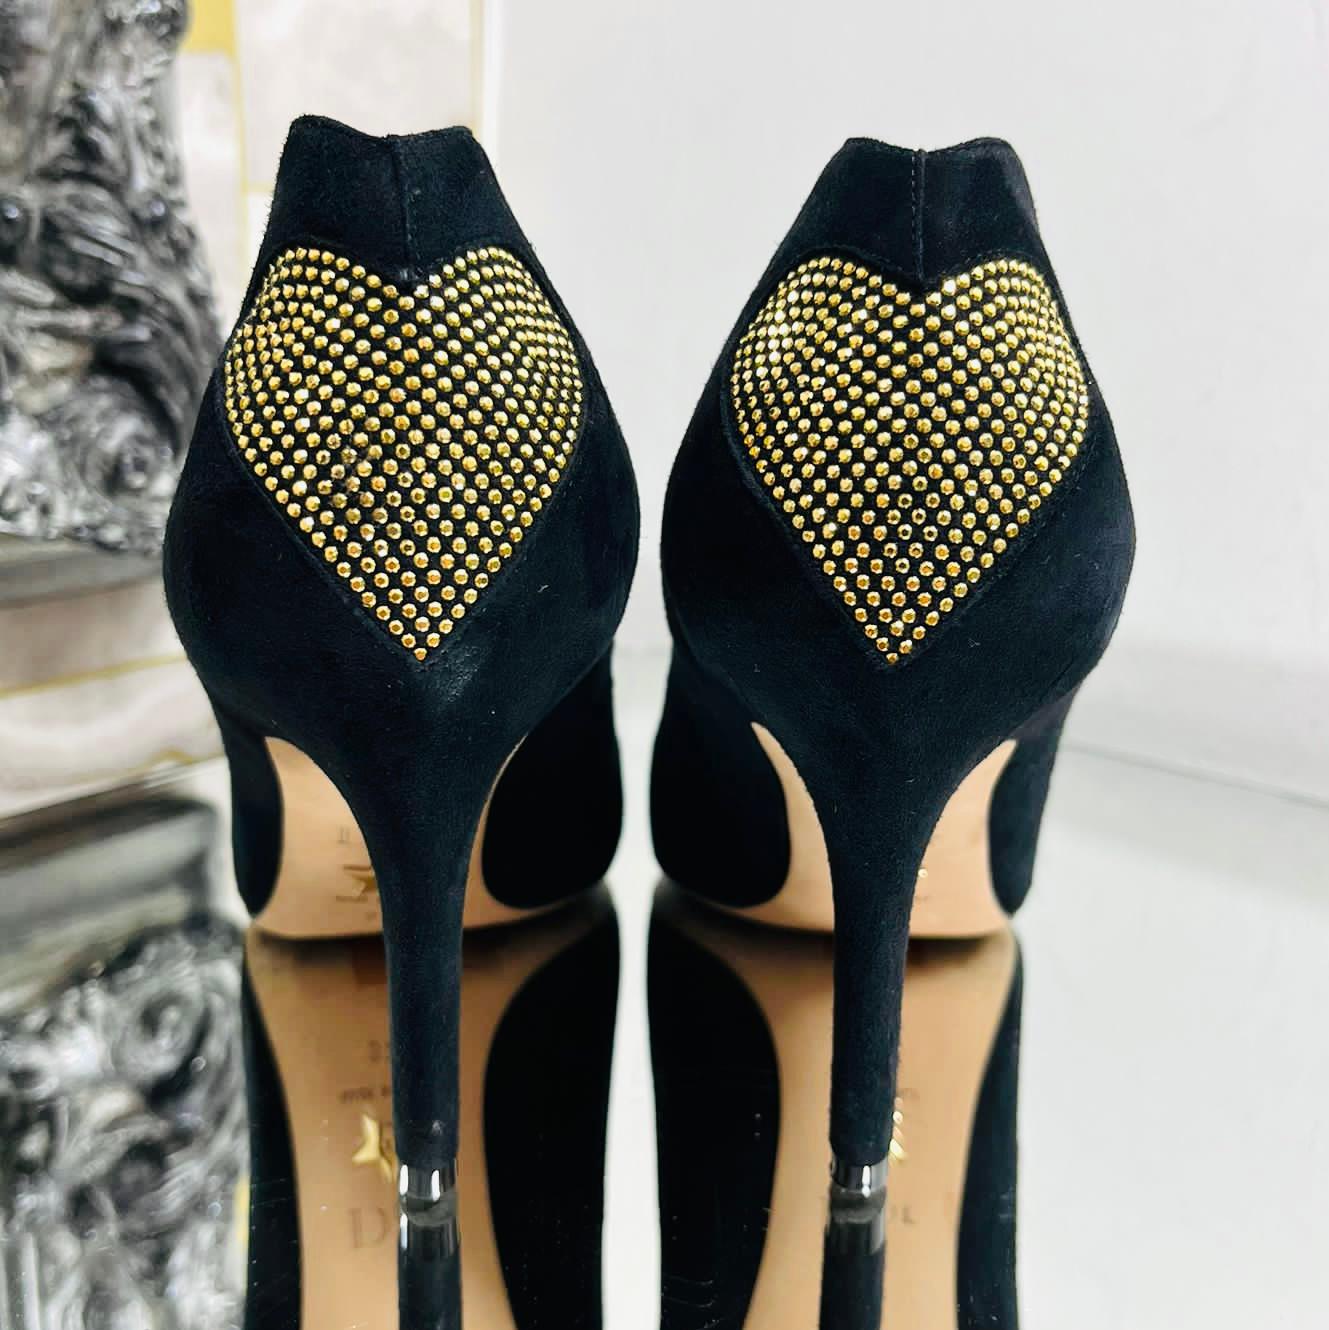 Christian Dior Stud Embellished Suede Pumps In Excellent Condition For Sale In London, GB